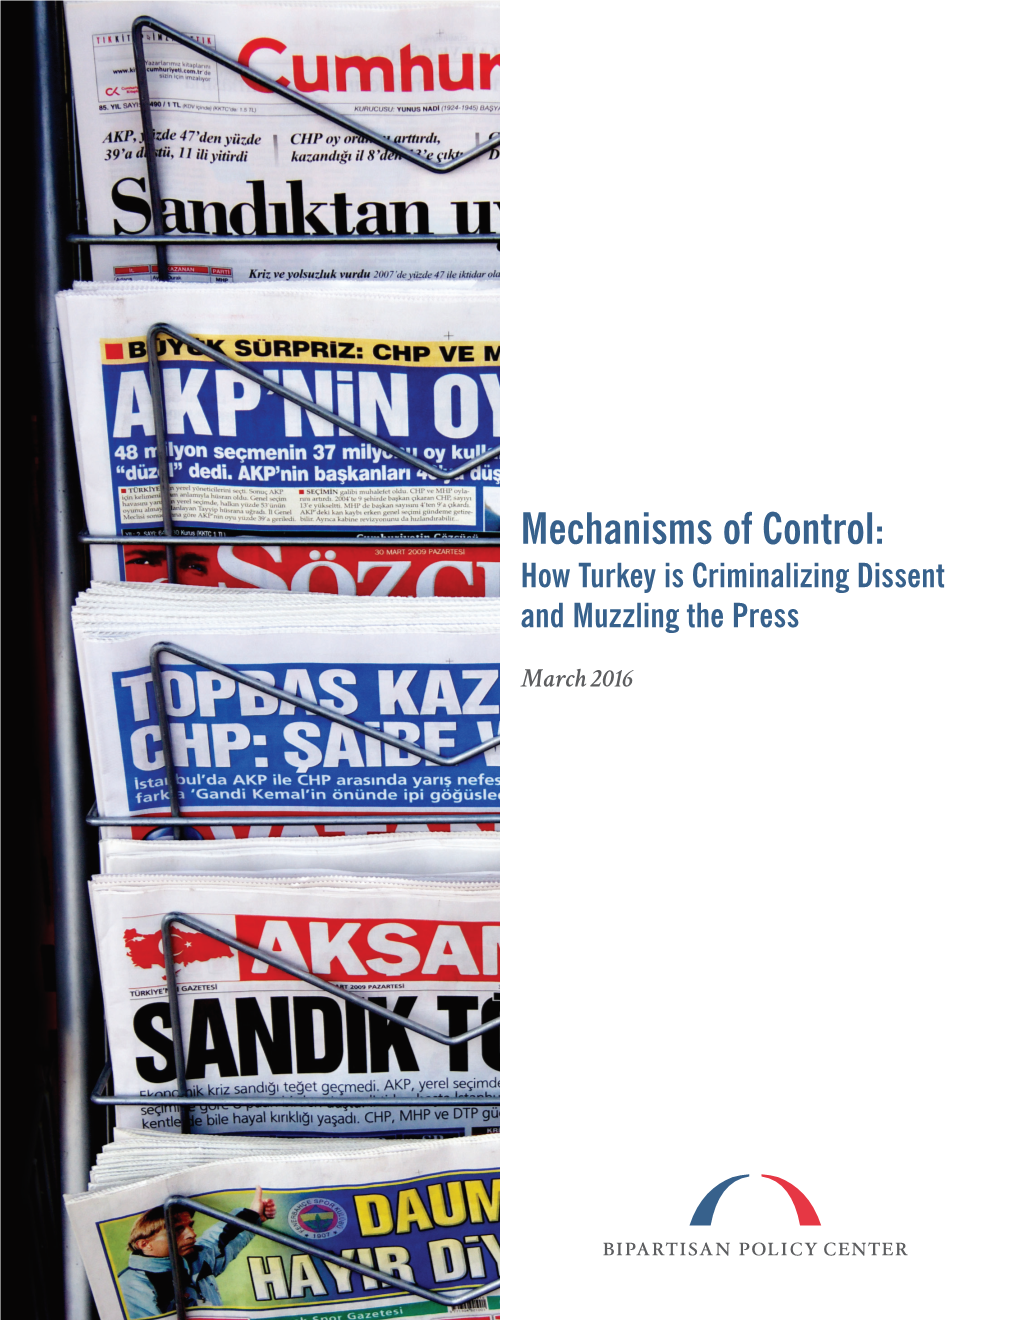 Mechanisms of Control: How Turkey Is Criminalizing Dissent and Muzzling the Press